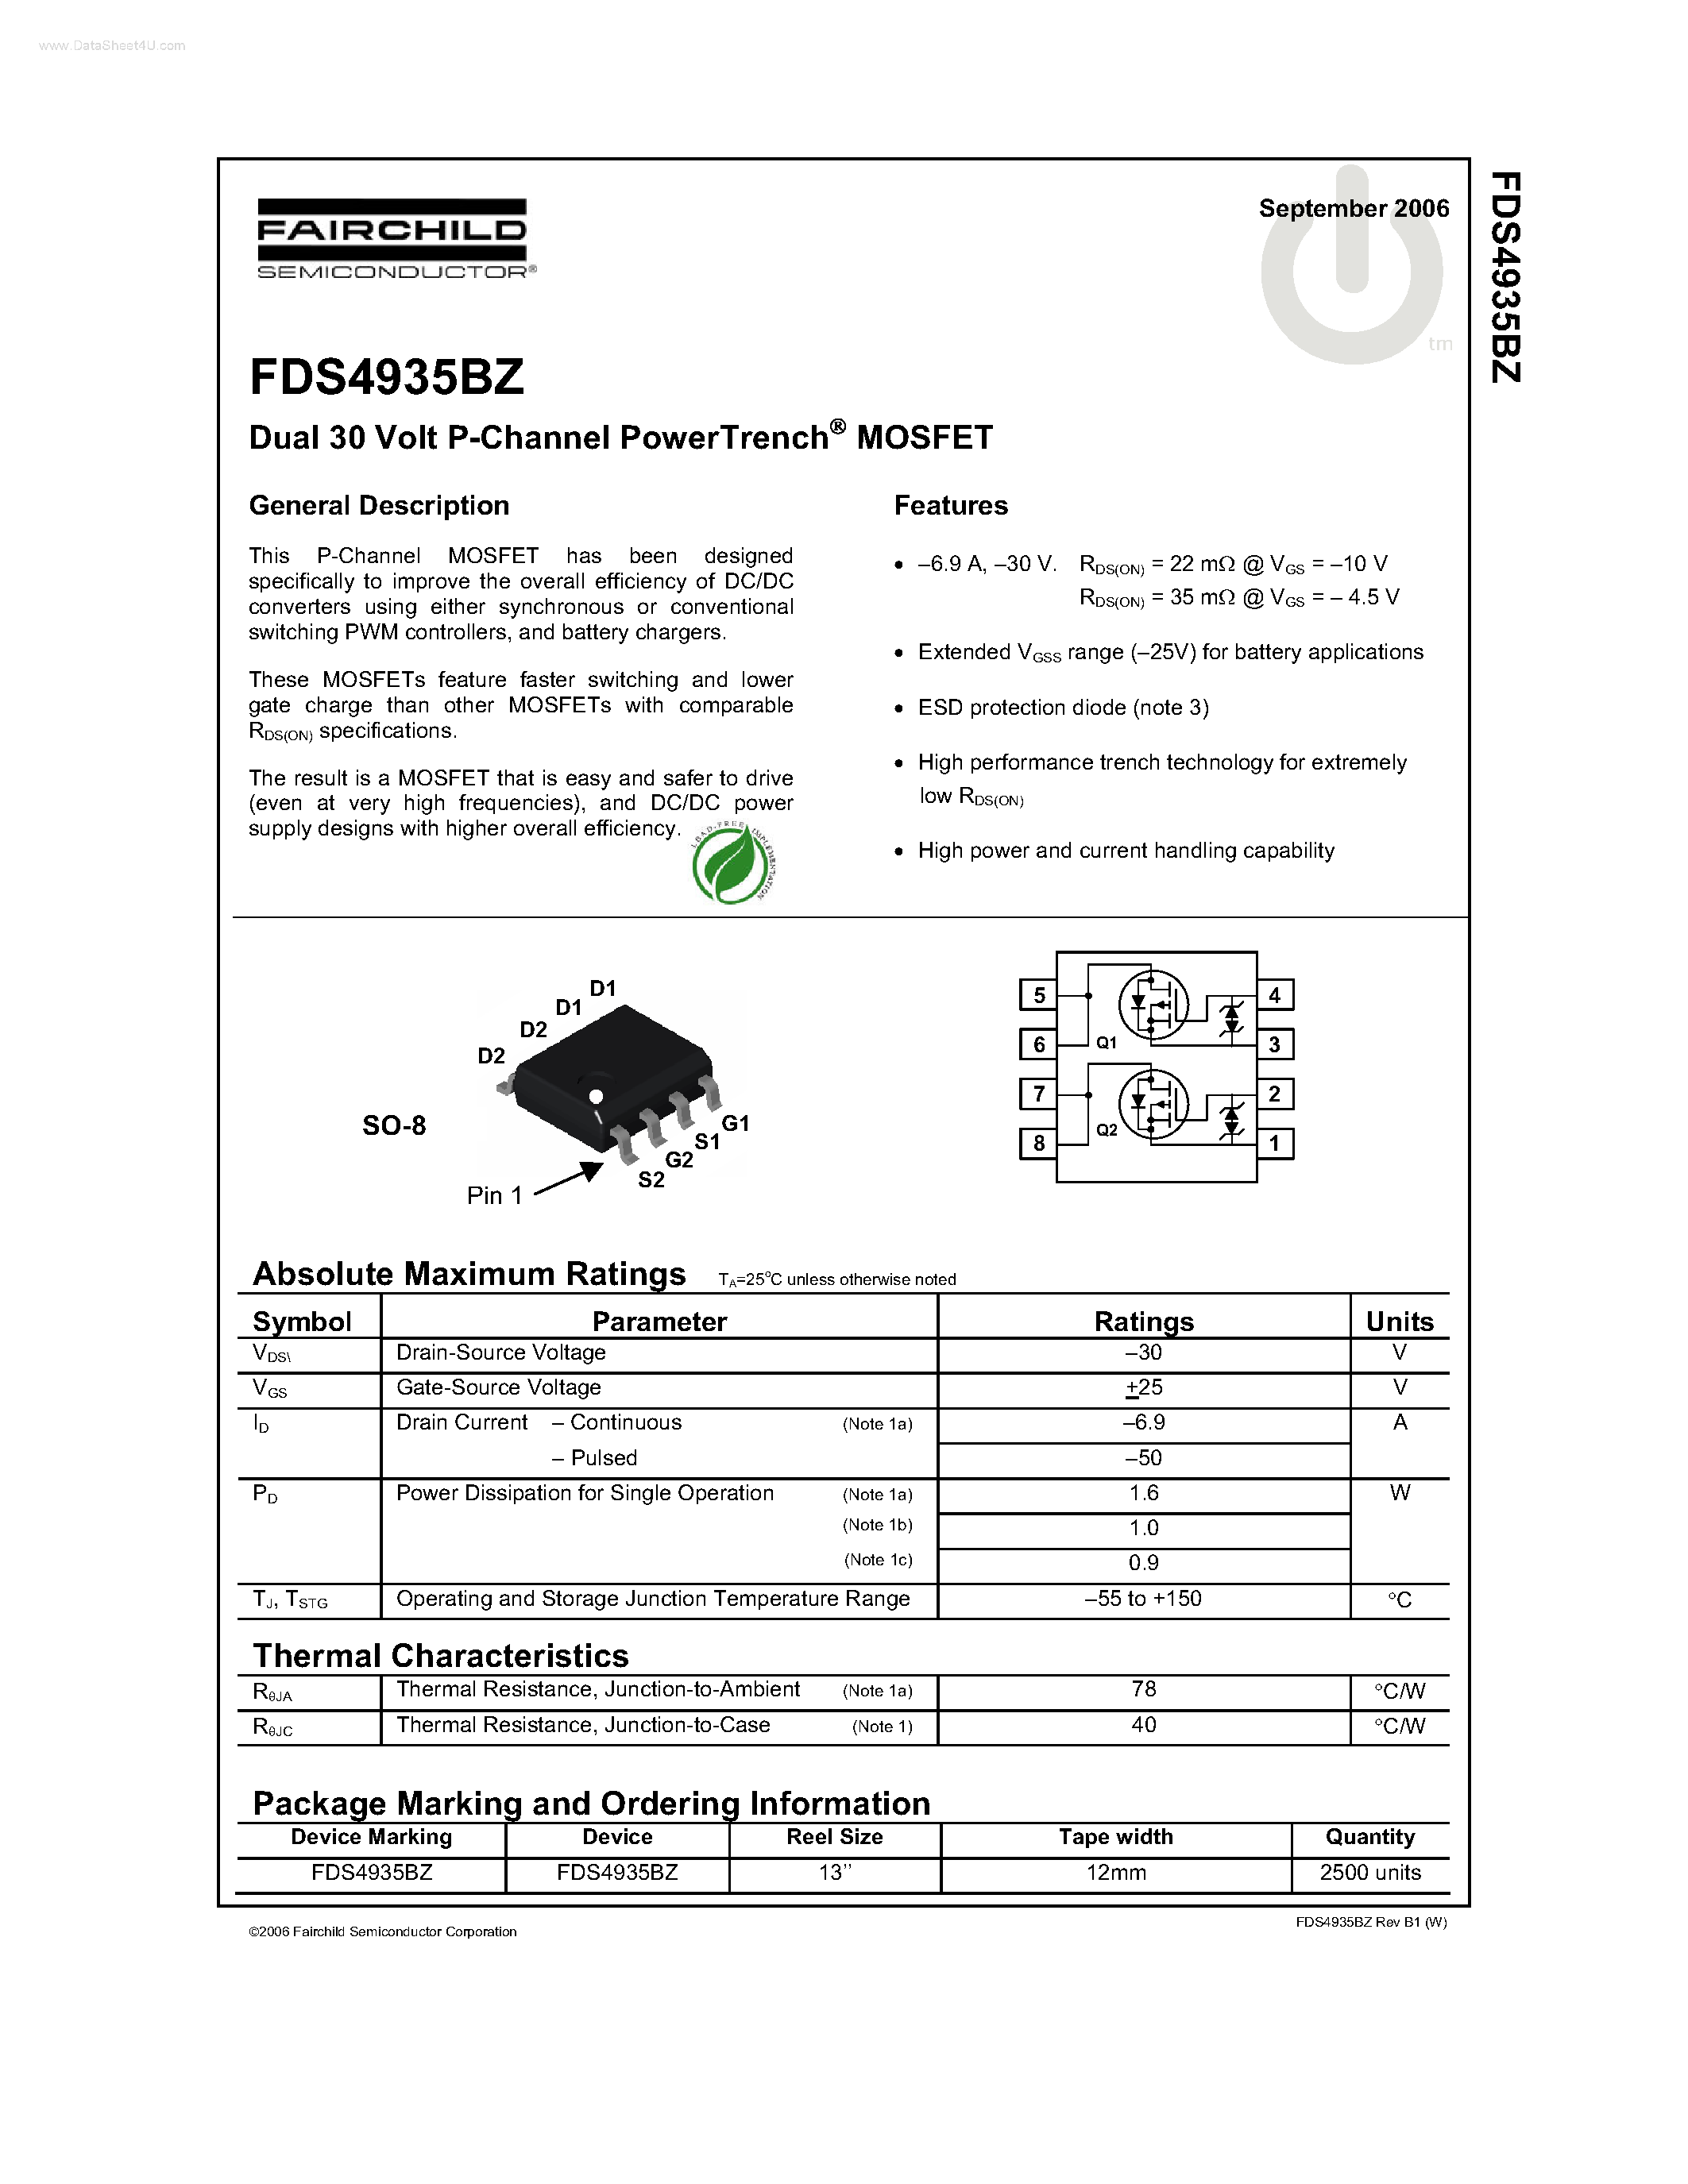 Даташит FDS4935BZ - Dual 30 Volt P-Channel PowerTrench MOSFET страница 1